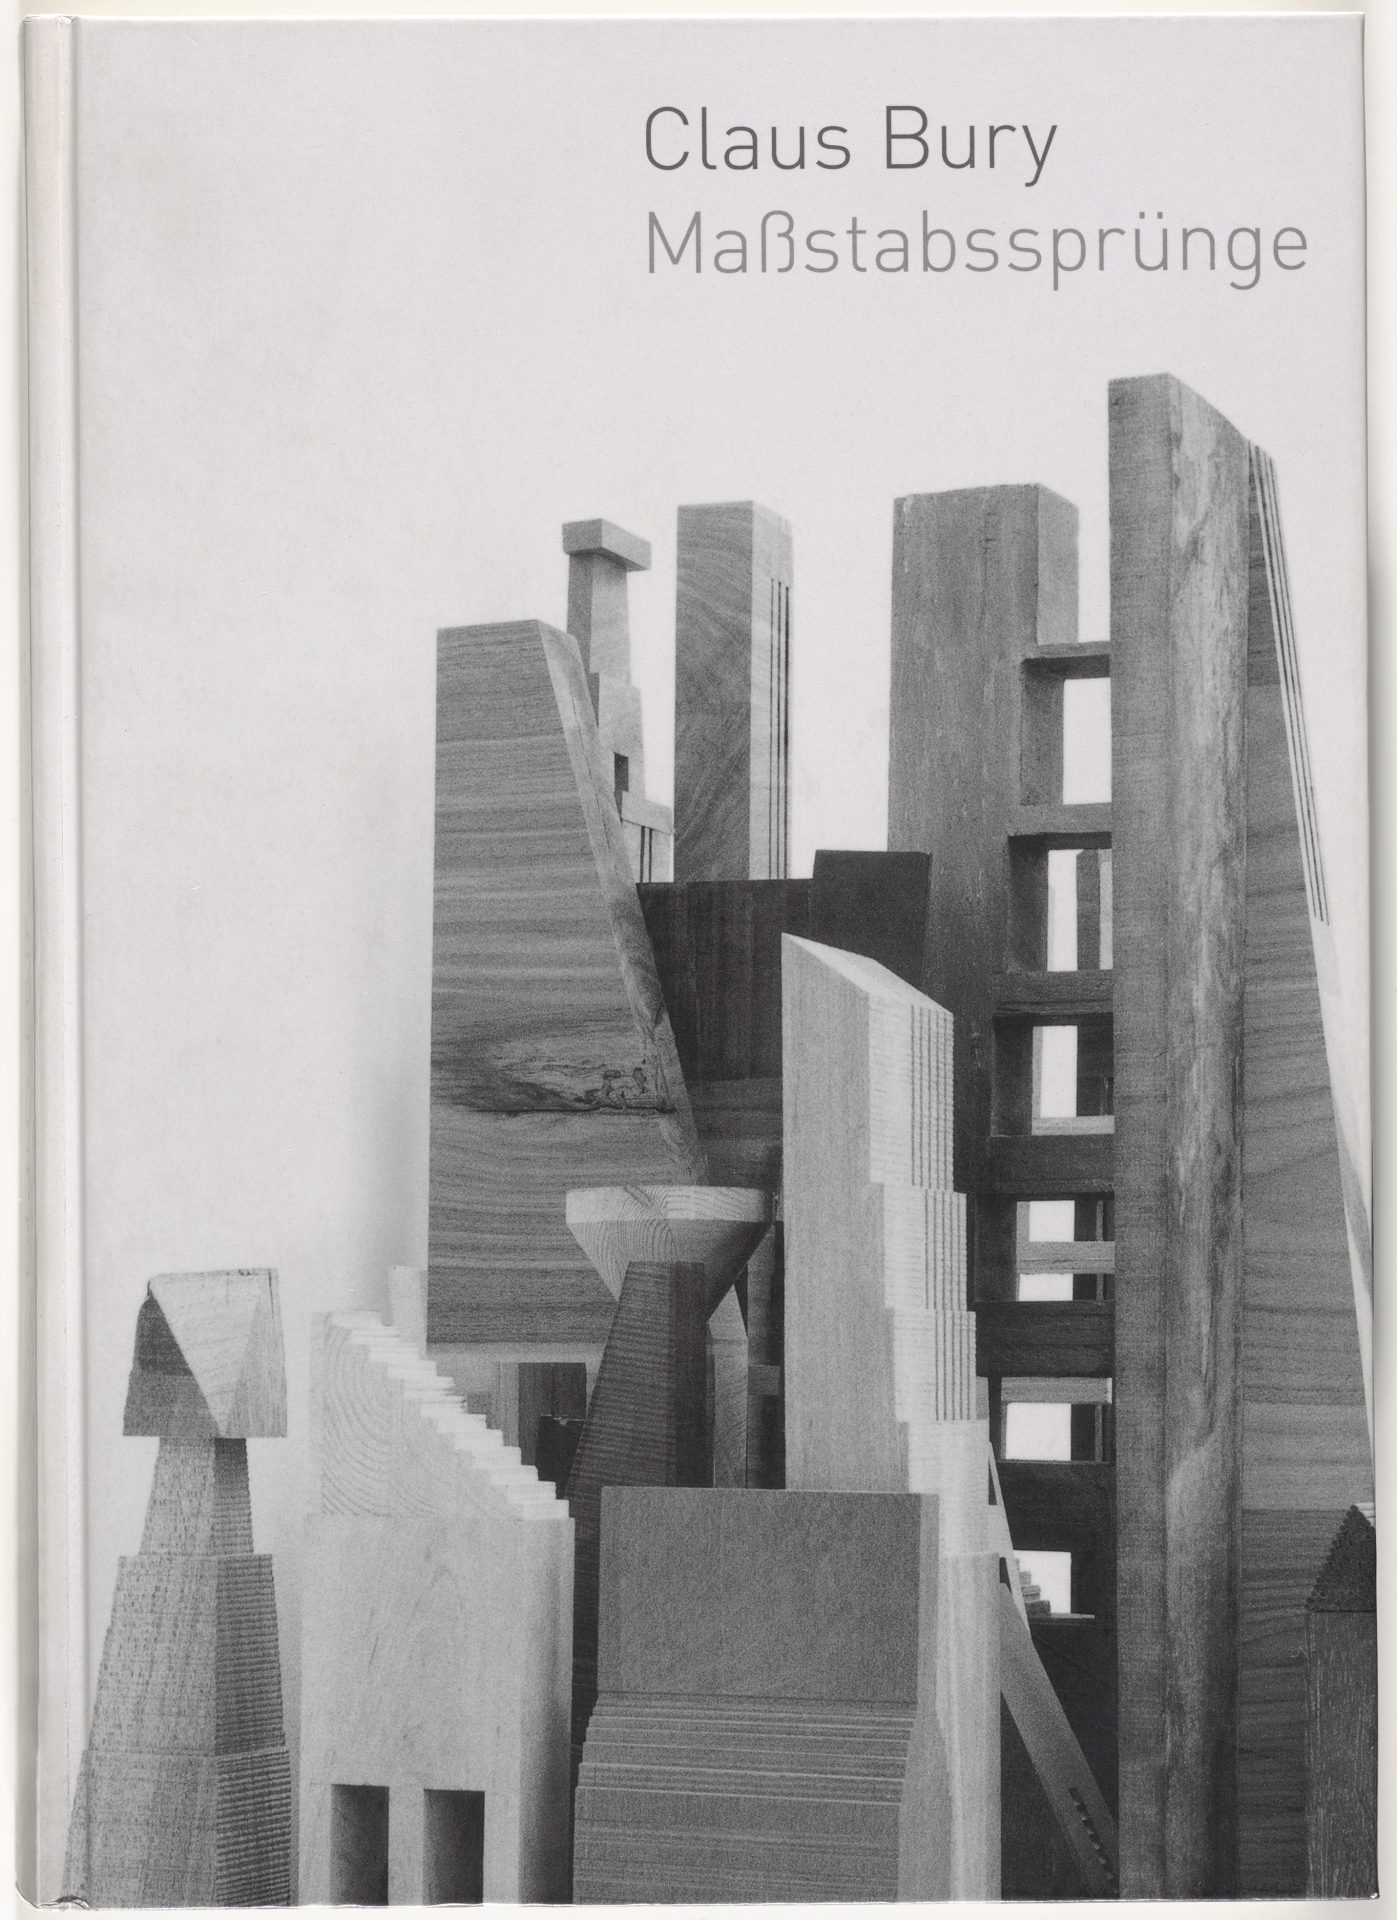 Cover exhibition catalog. It shows a black and white photograph with various wooden building elements. The arrangement is reminiscent of a cityscape. Above it is the title in the top right-hand corner.